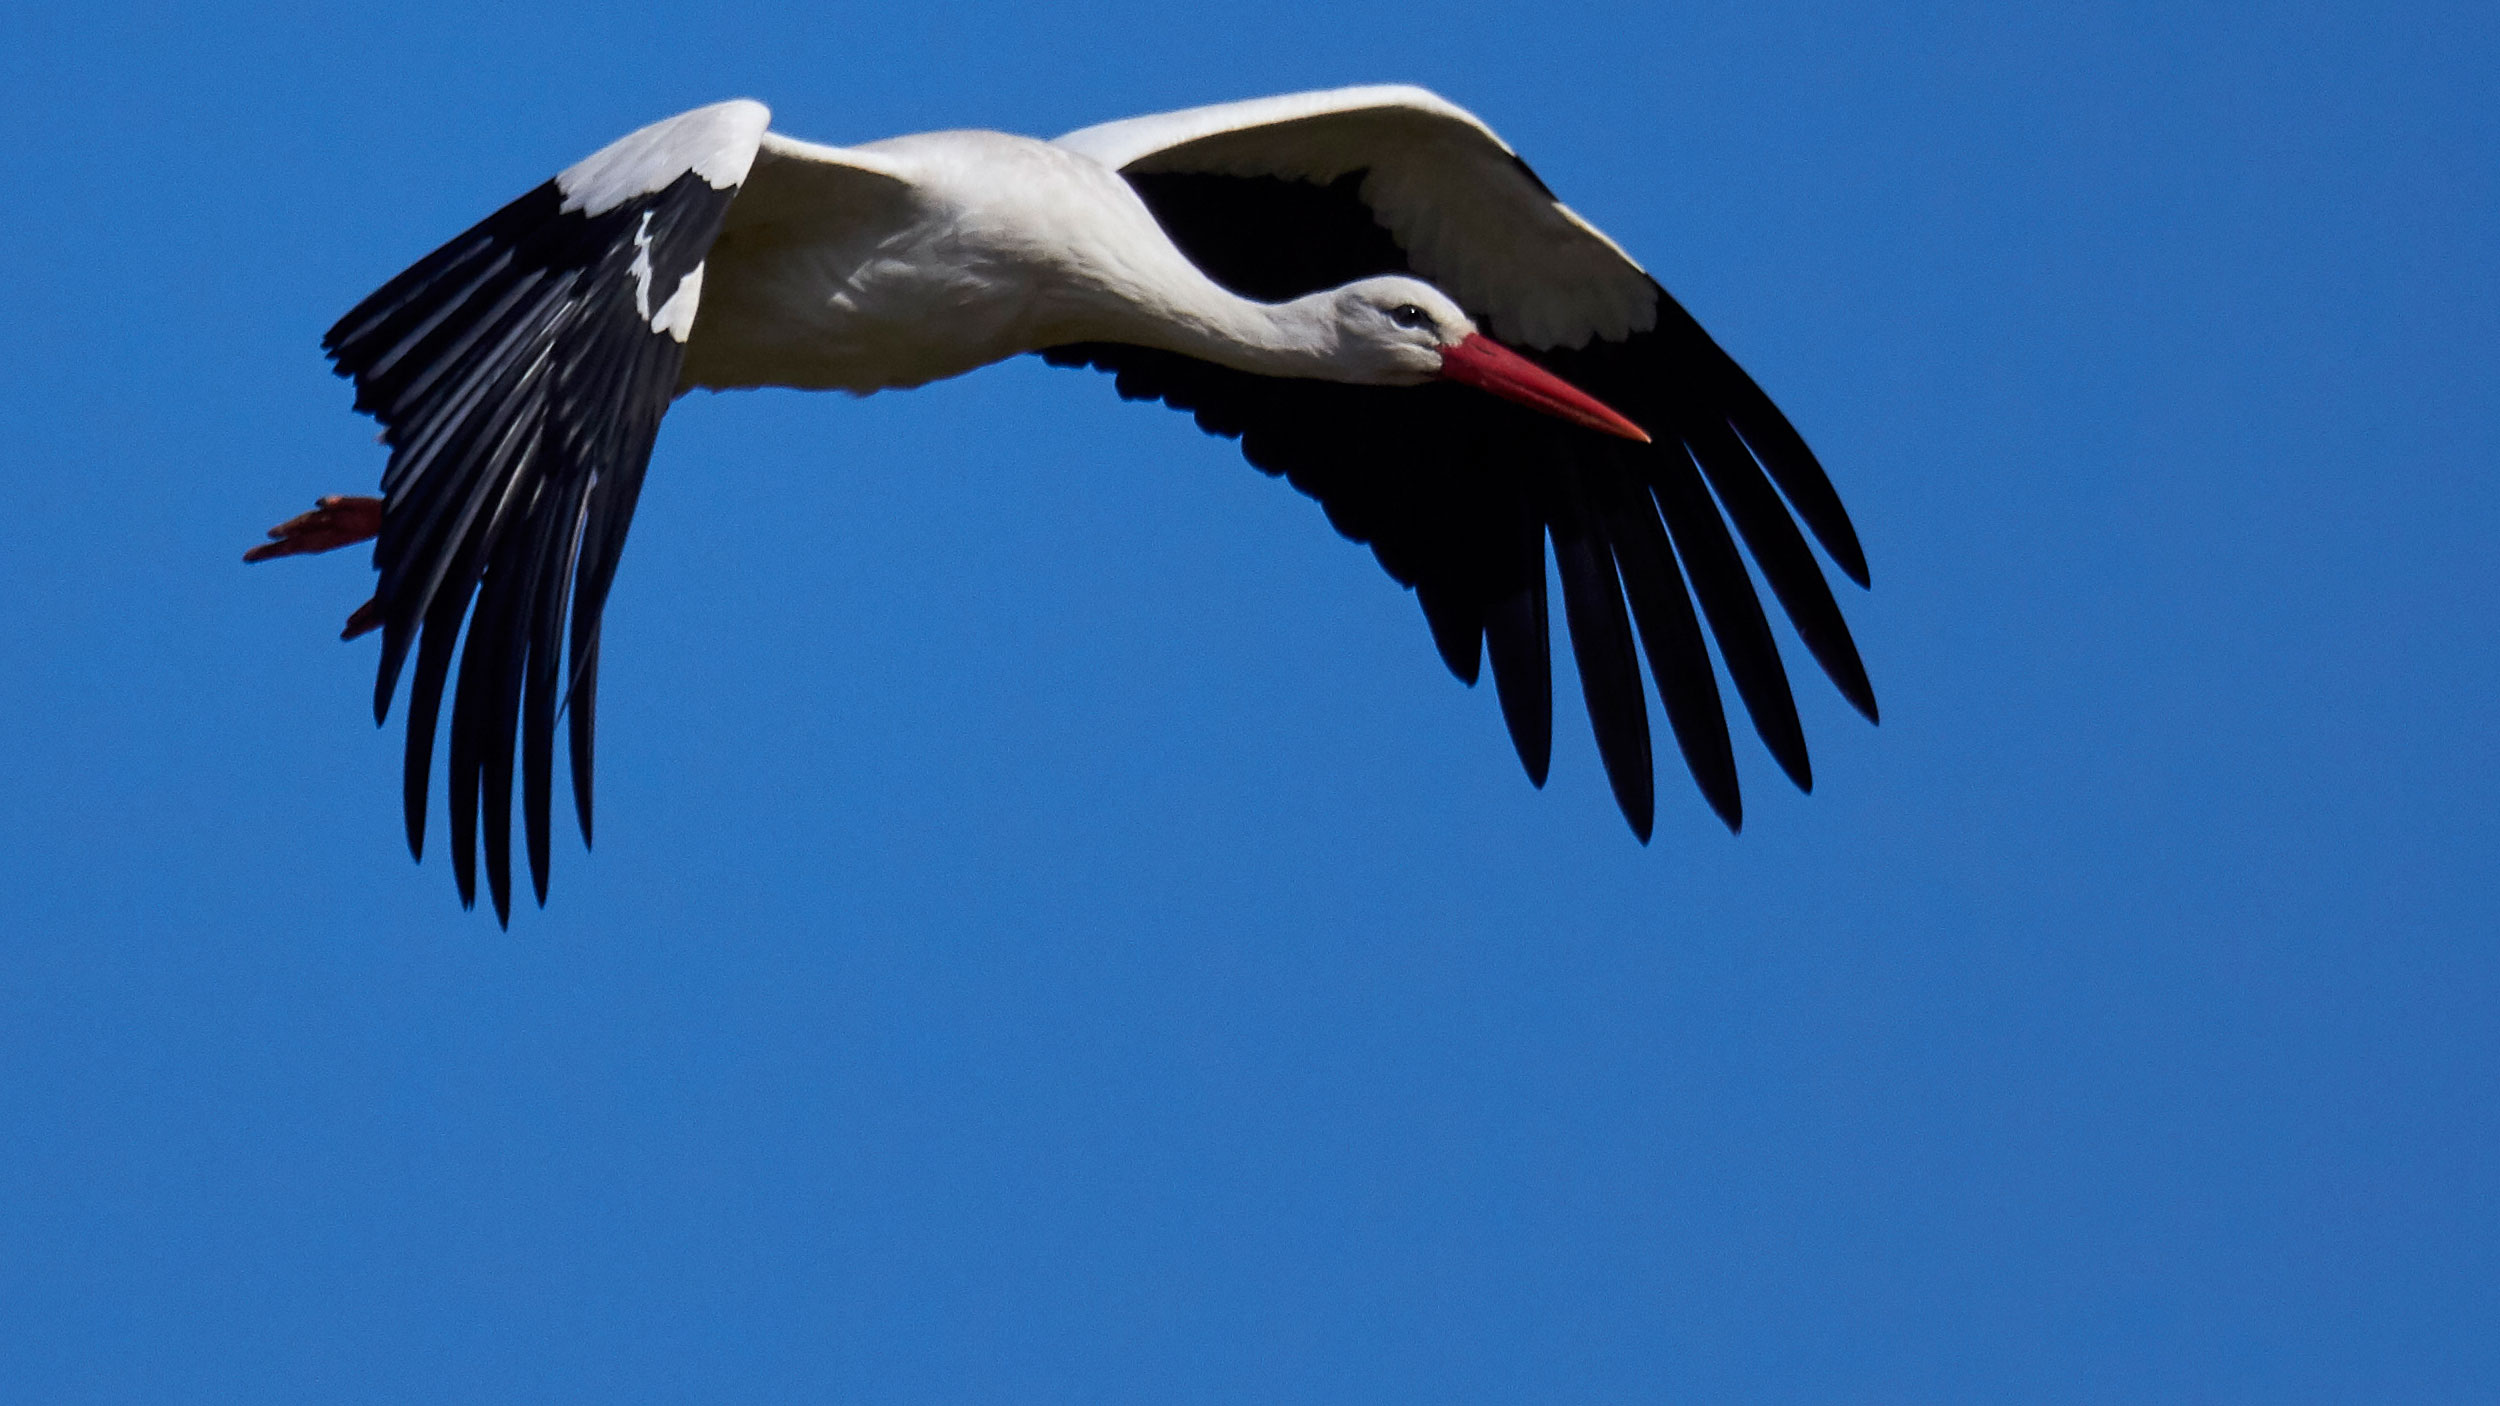 How to better understand the behavior of storks